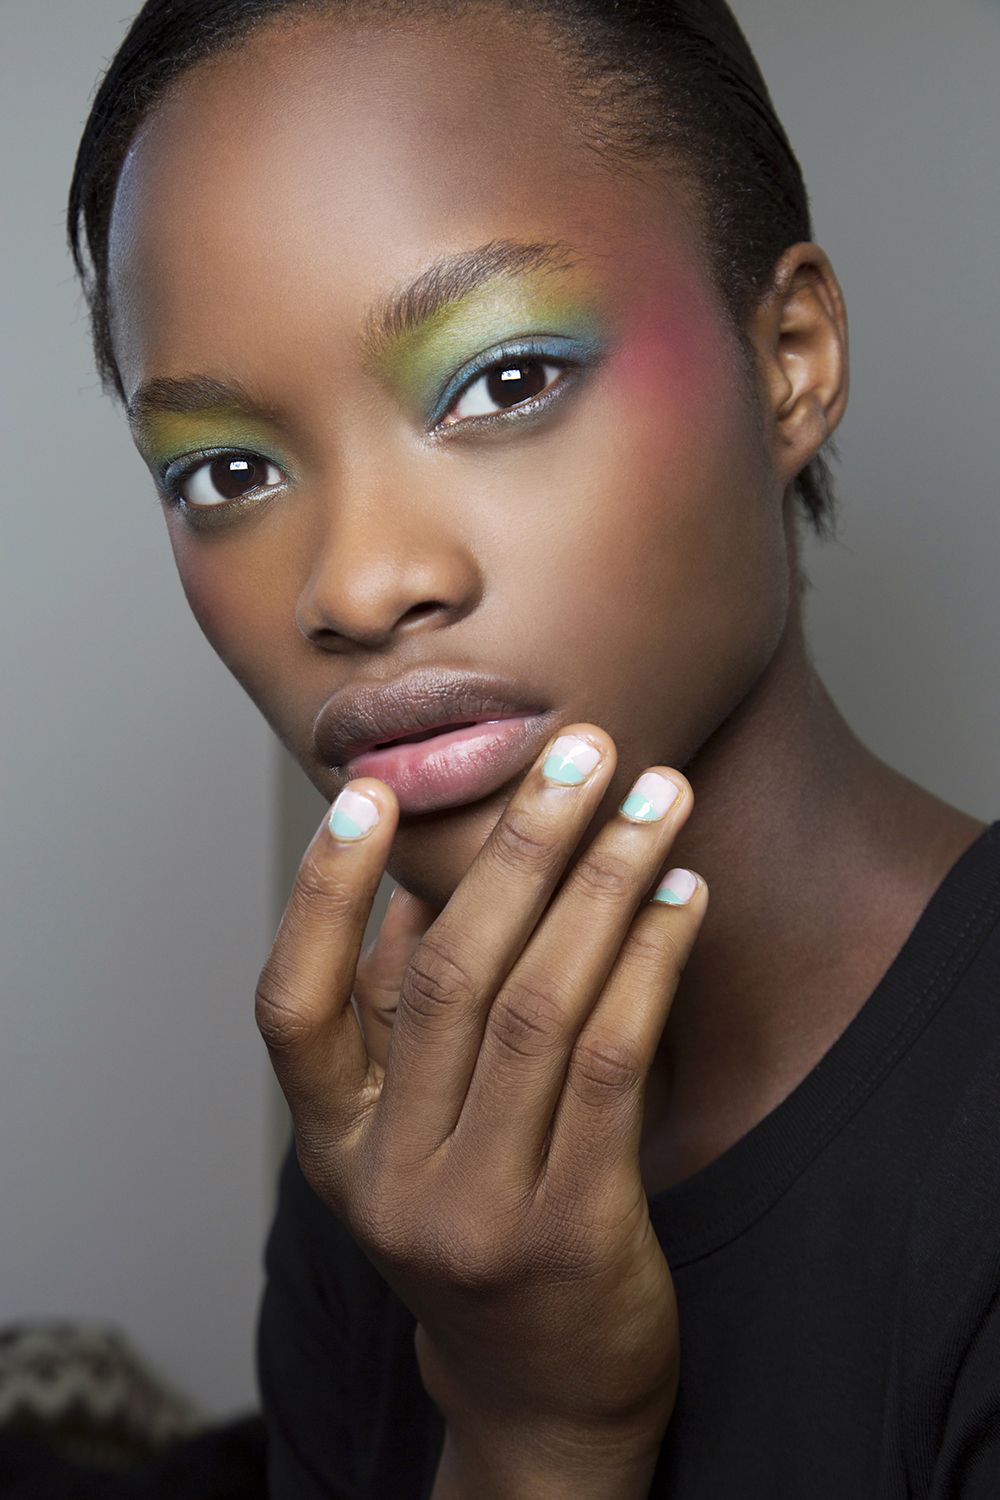 The eight 2016 nails trends you need to know about